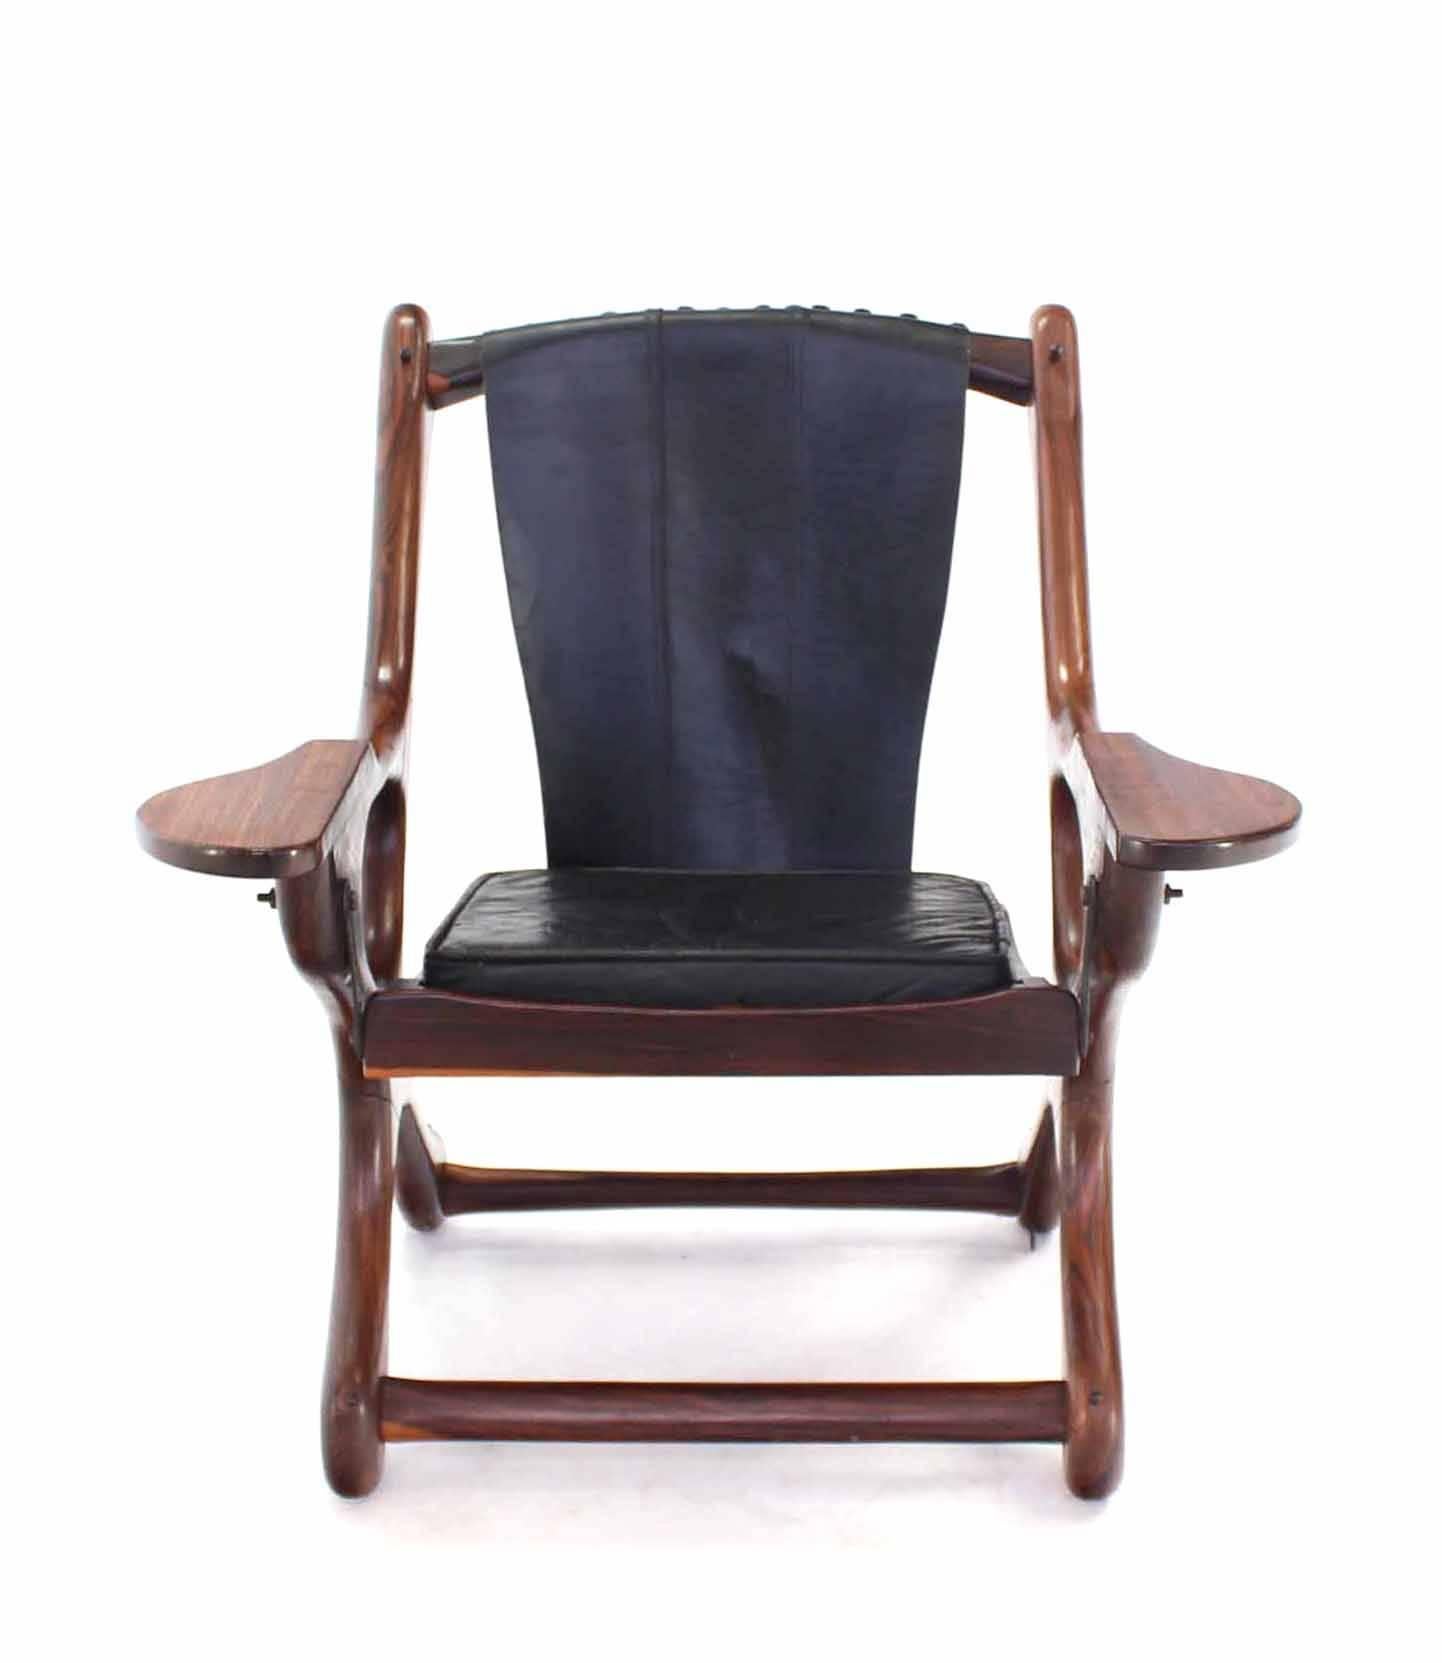 Heavy Rosewood Frame Leather Upholstery Lounge Chair For Sale 2